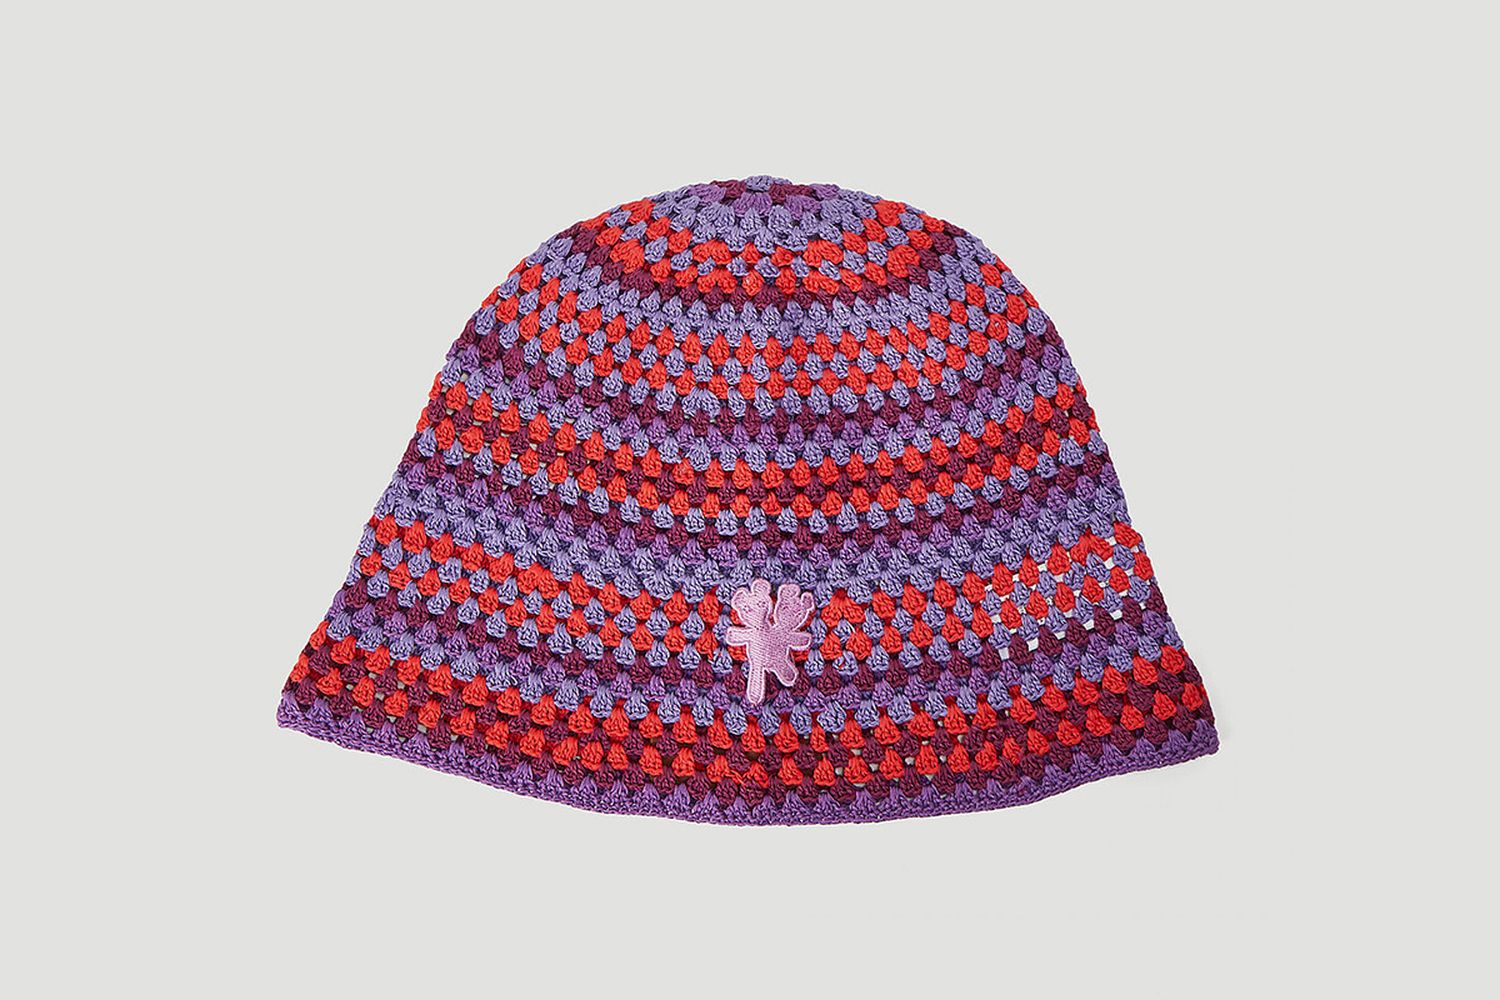 Psychedelic Knit Hat